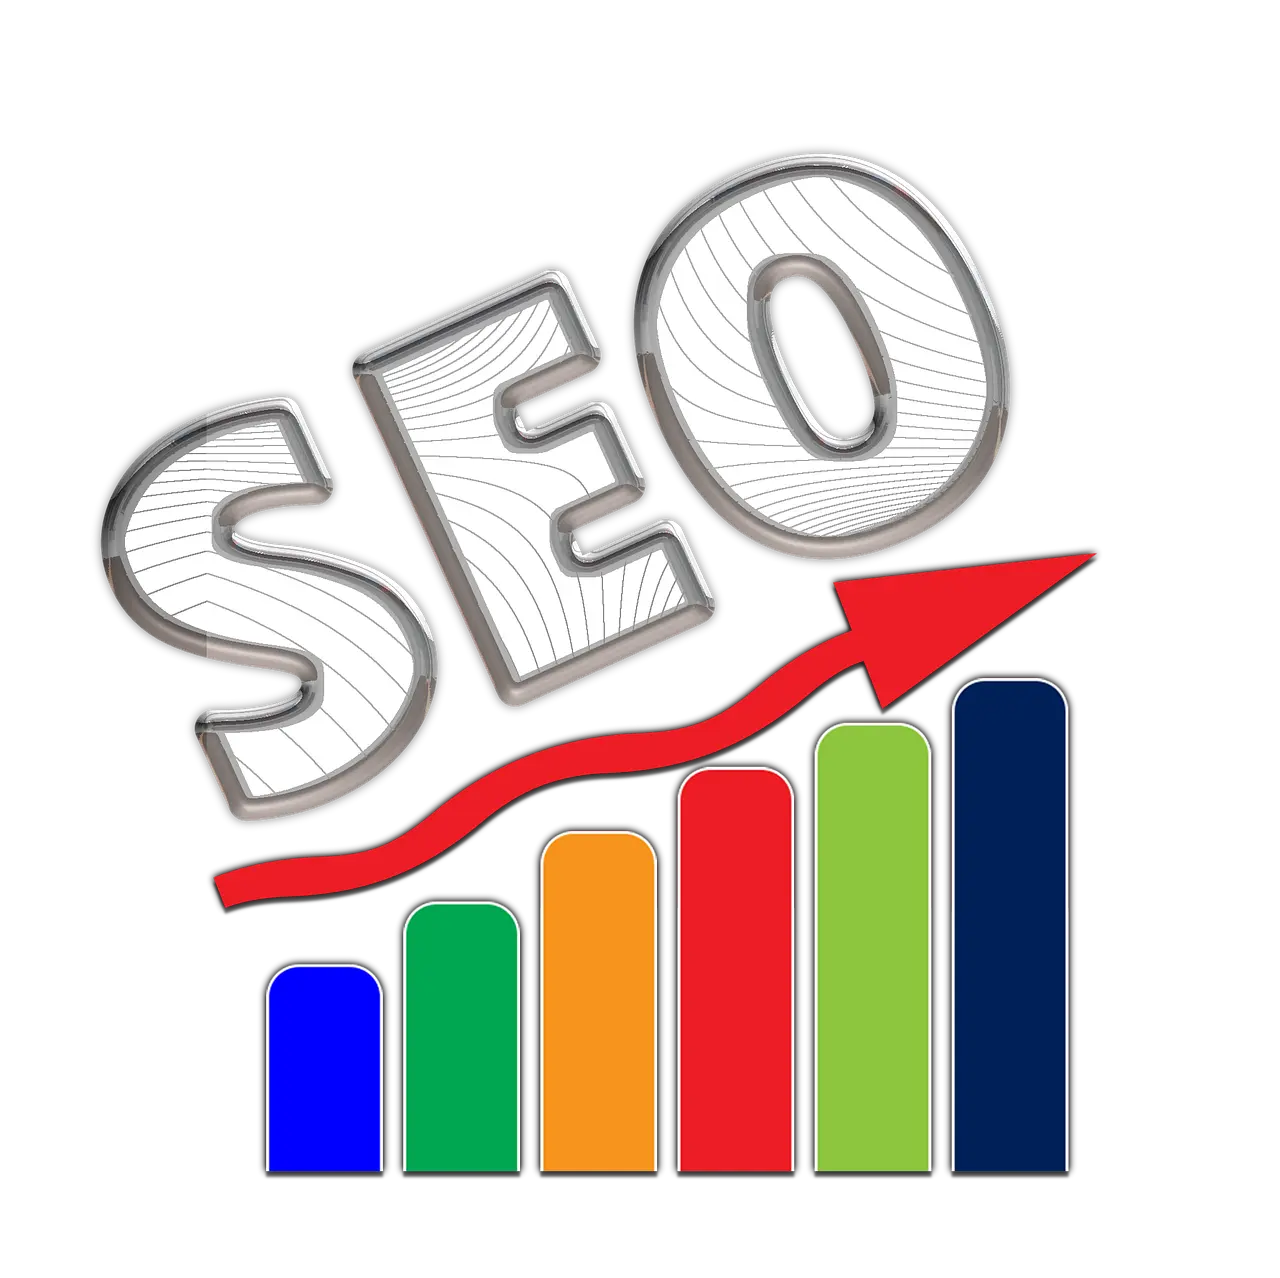 WordPress SEO is crucial to ensure your business and brand are seen.